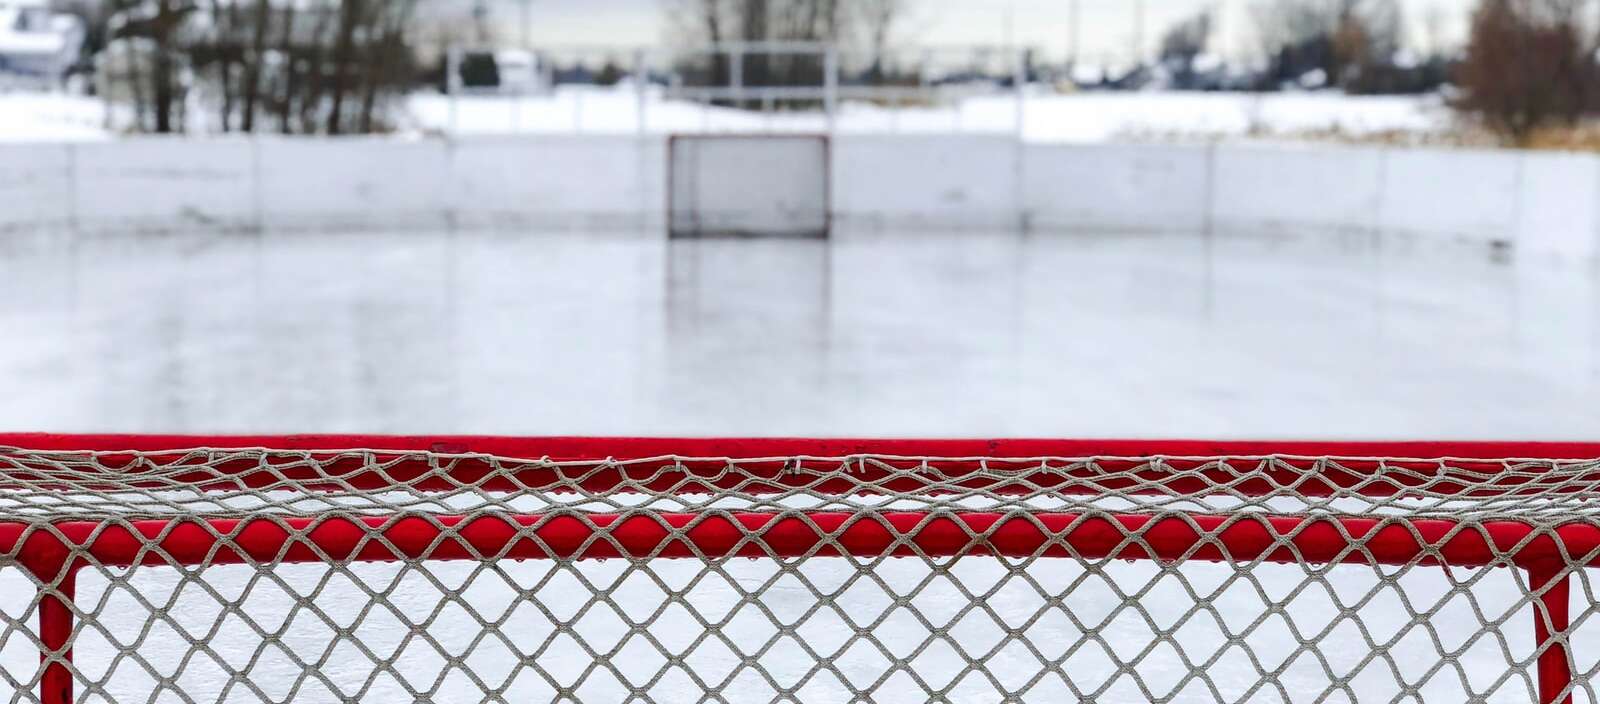 A red and white goal net on ice field